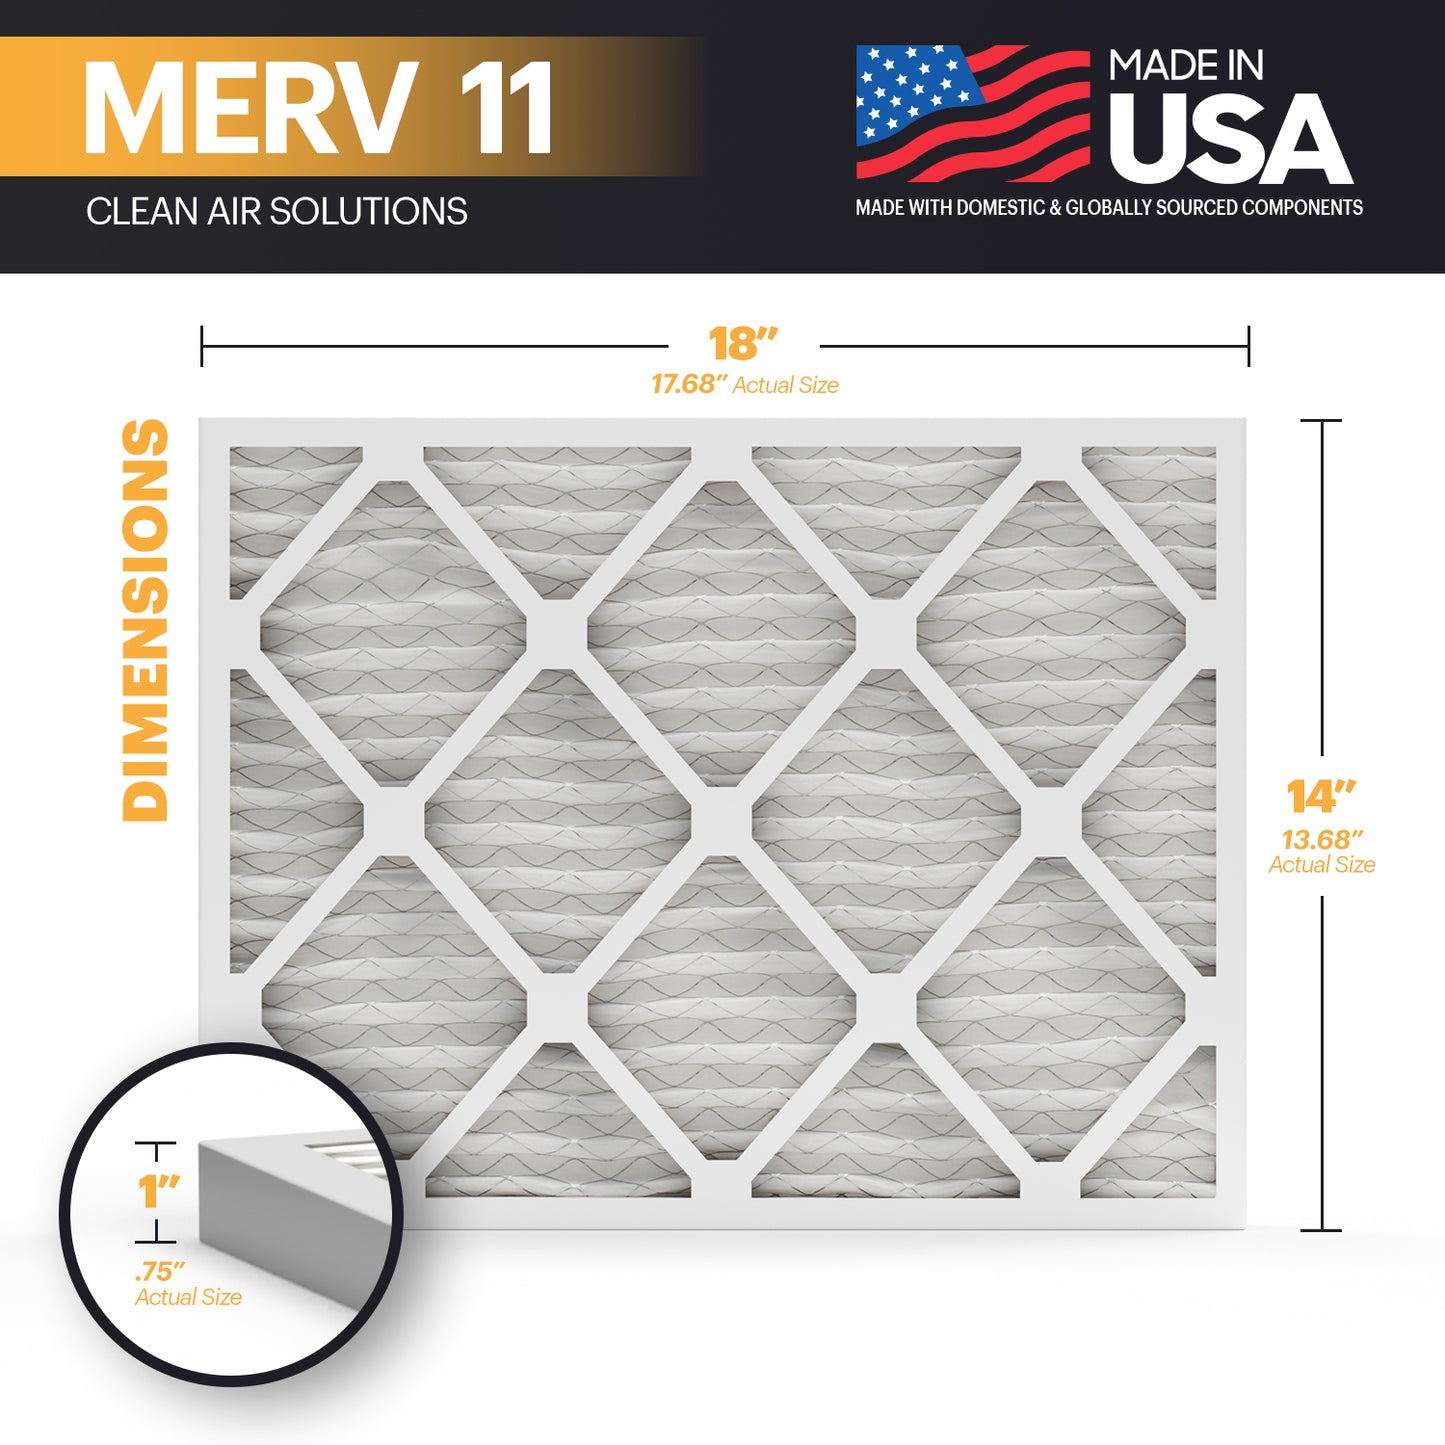 BNX TruFilter 14x18x1 MERV 11 Pleated Air Filter – Made in USA (6-Pack)